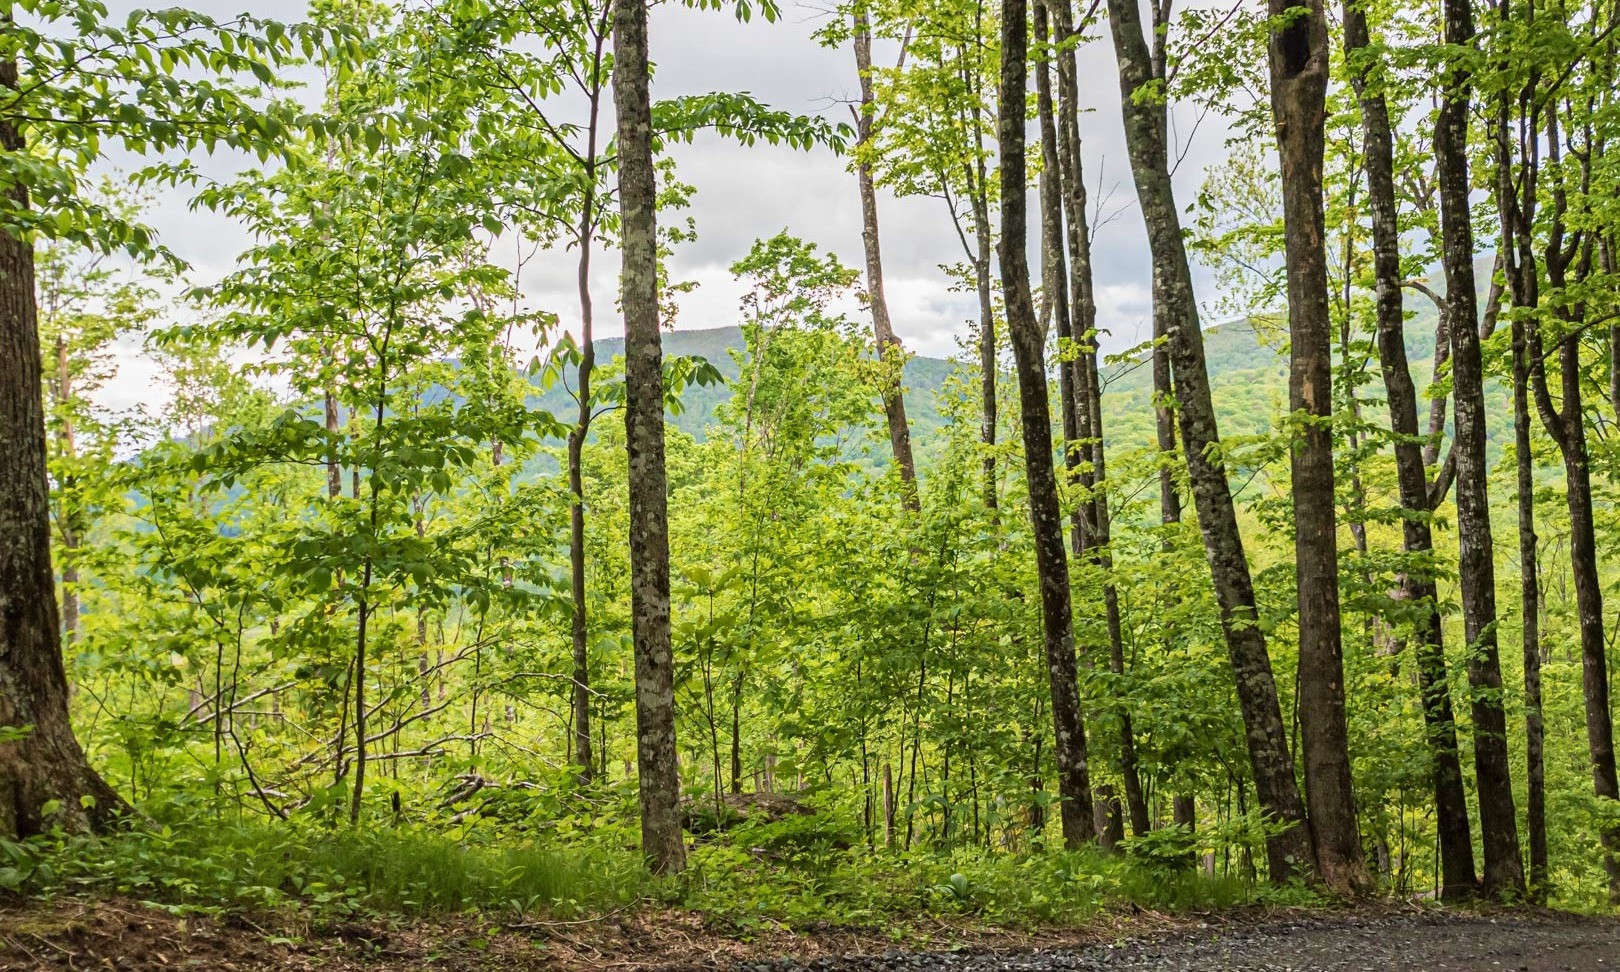 If you are looking for a private estate sized home site to build your dream cabin or home in the North Carolina Mountains, take a look at this beautifully wooded 6.34 acre tract located in the Chestnut Tree Farms Community in West Jefferson, NC.